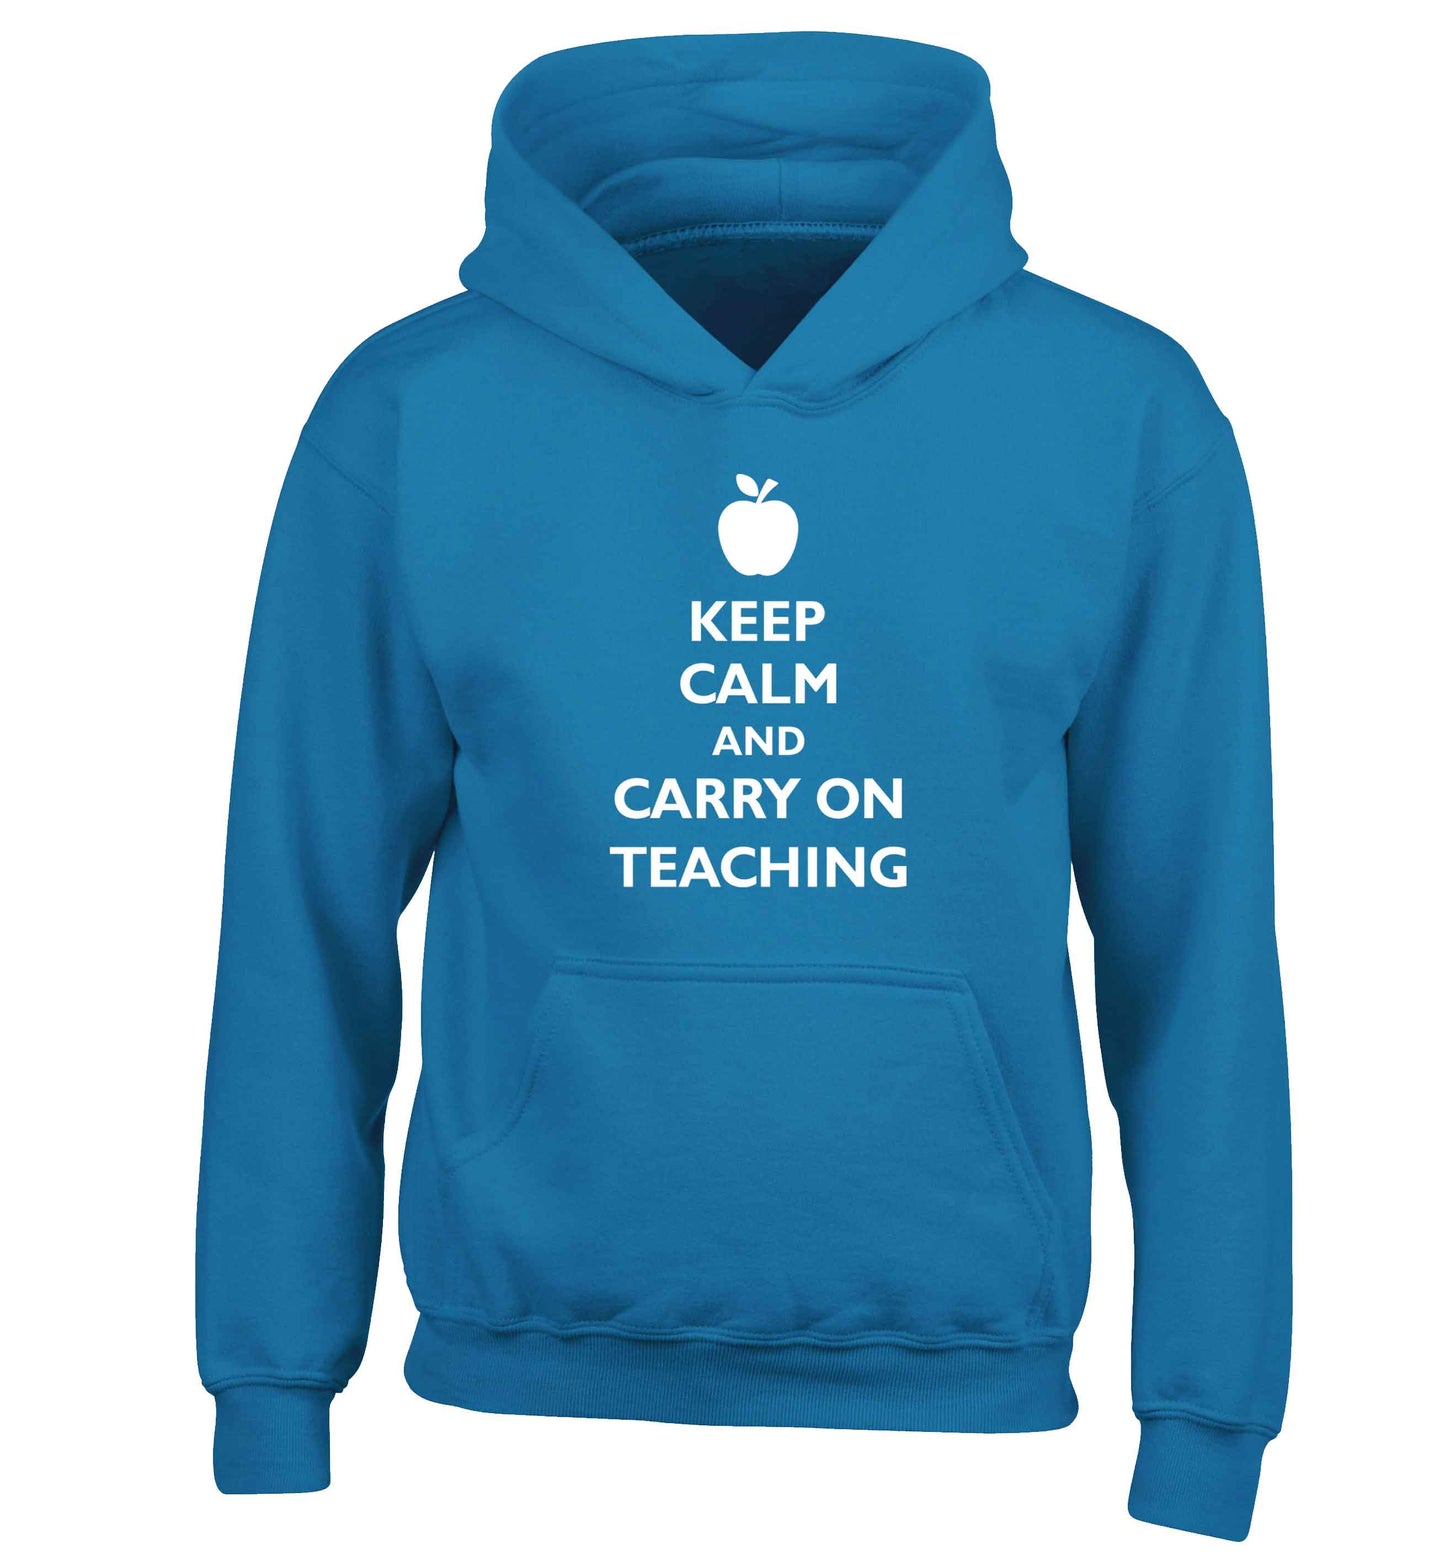 Keep calm and carry on teaching children's blue hoodie 12-13 Years